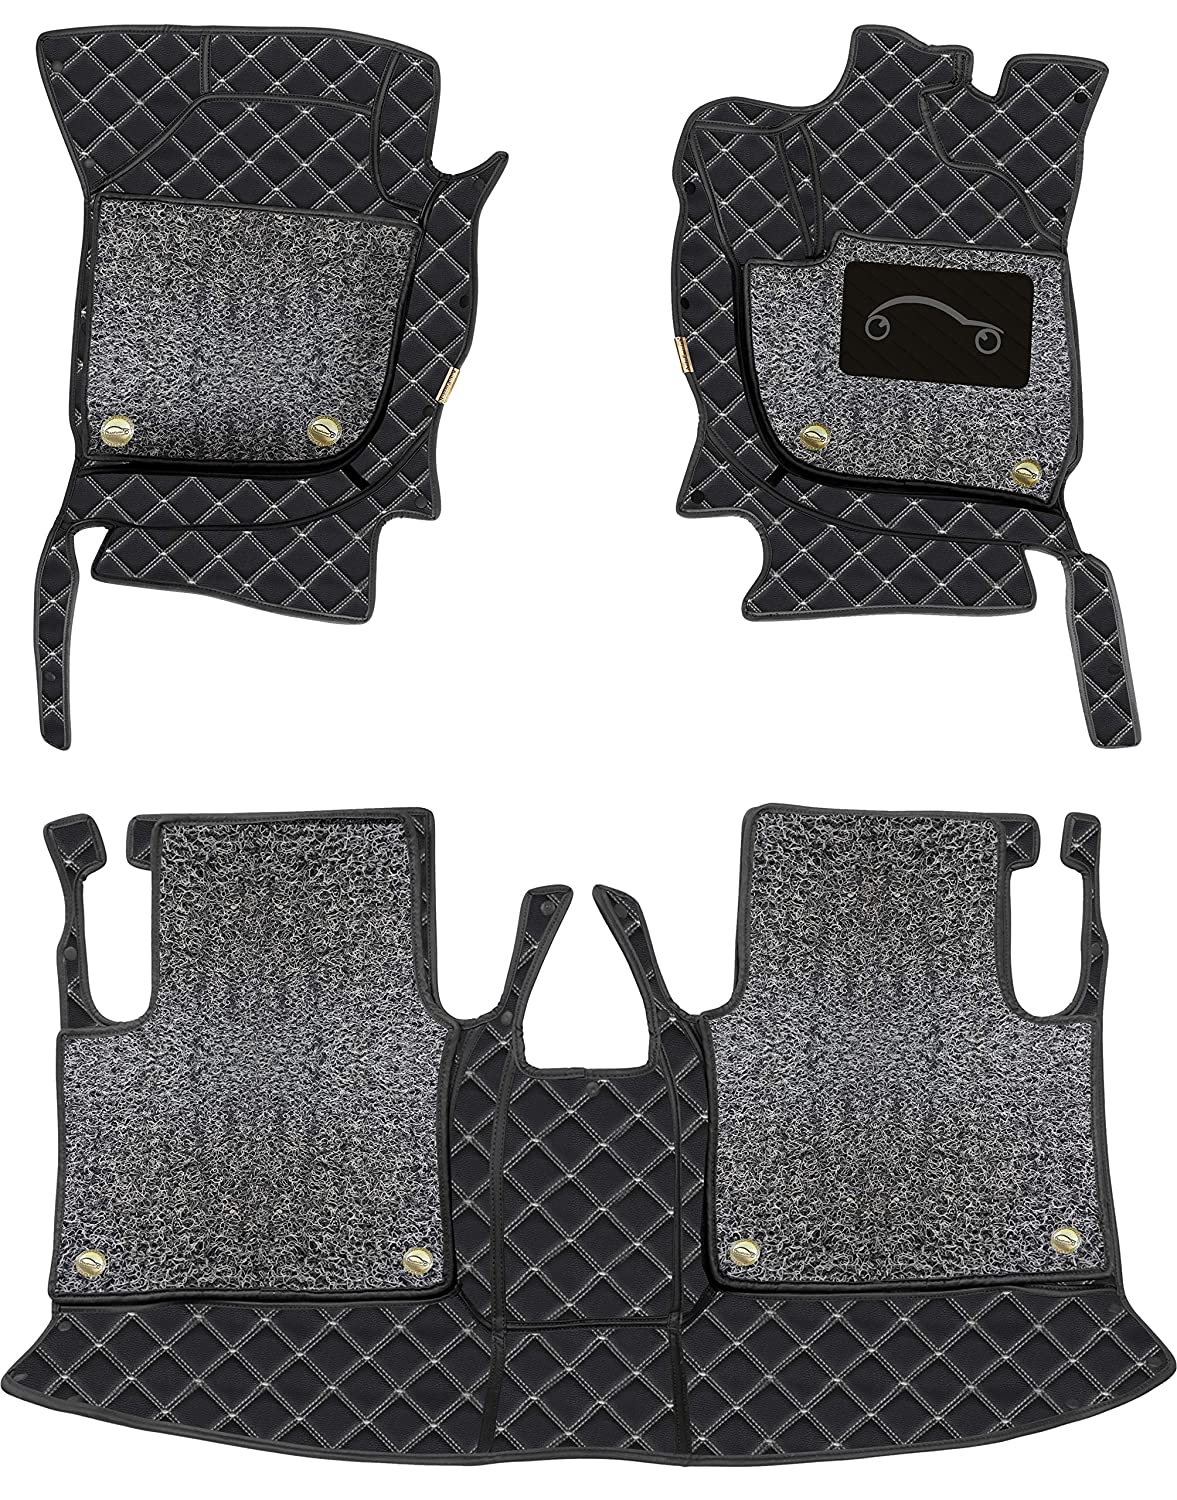 Land Rover Vogue 2022-7D Luxury Car Mat, All Weather Proof, Anti-Skid, 100% Waterproof & Odorless with Unique Diamond Fish Design (24mm Luxury PU Leather, 2 Rows)